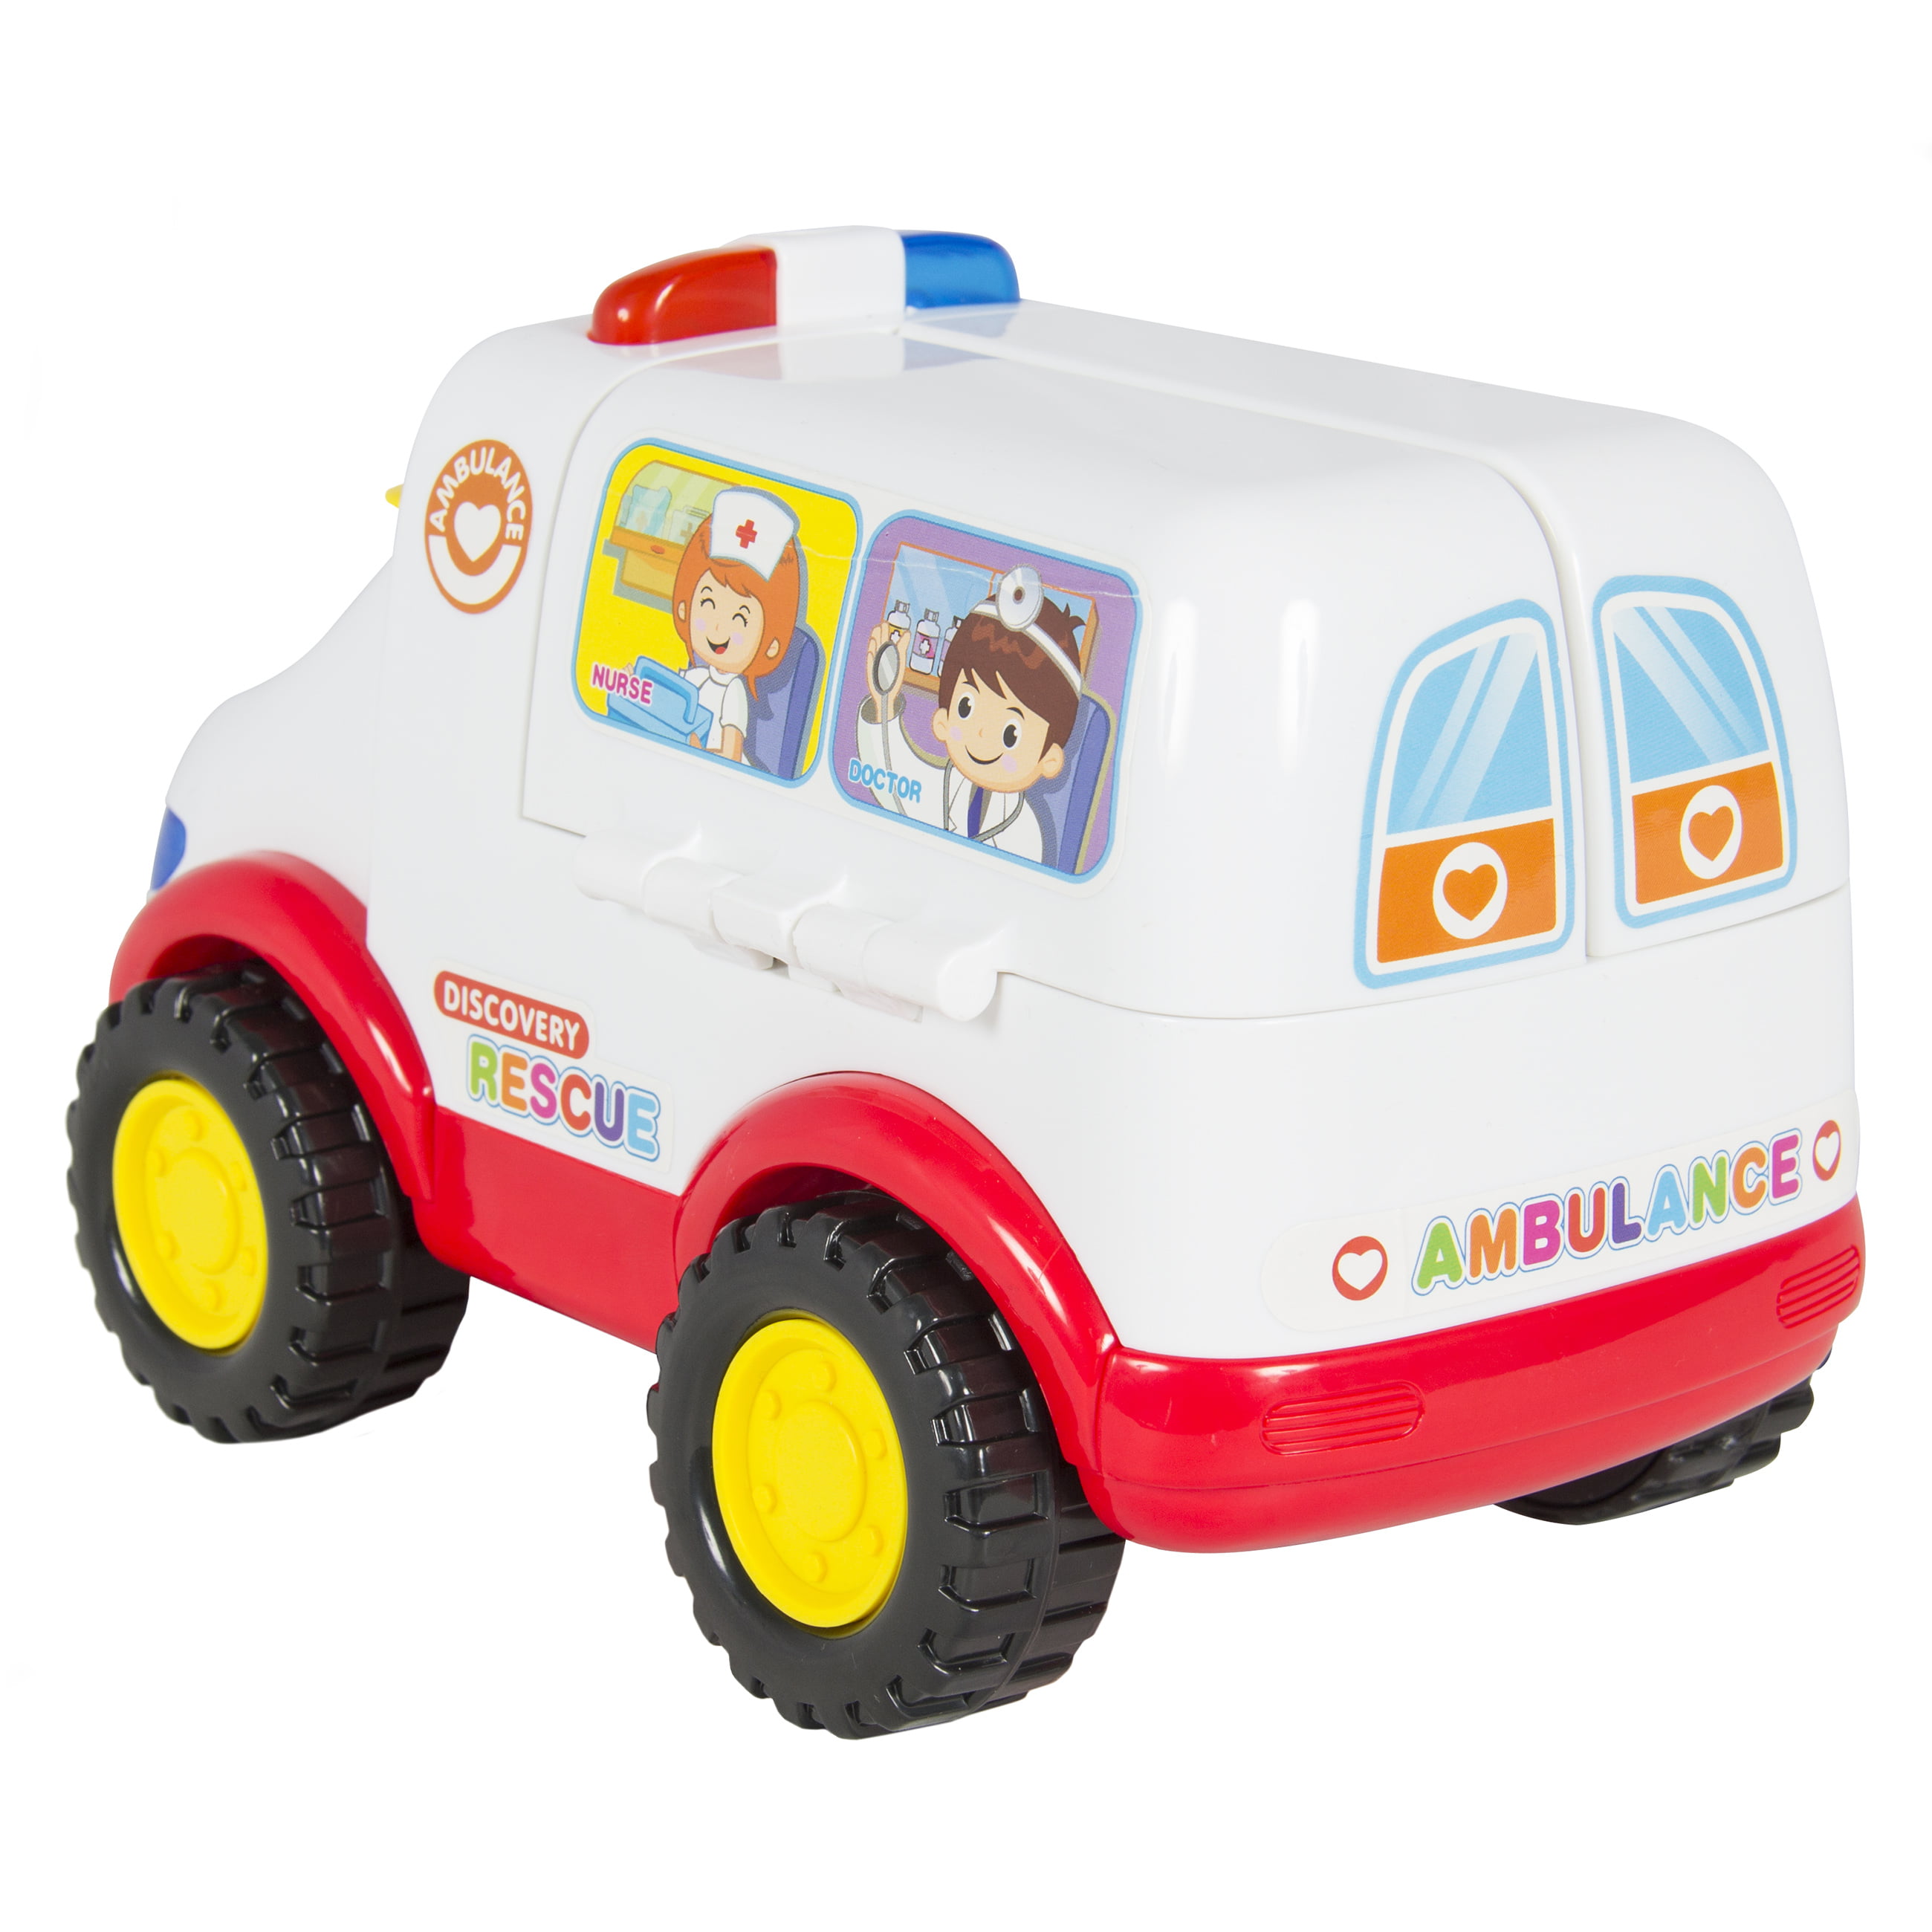 discovery rescue ambulance toy